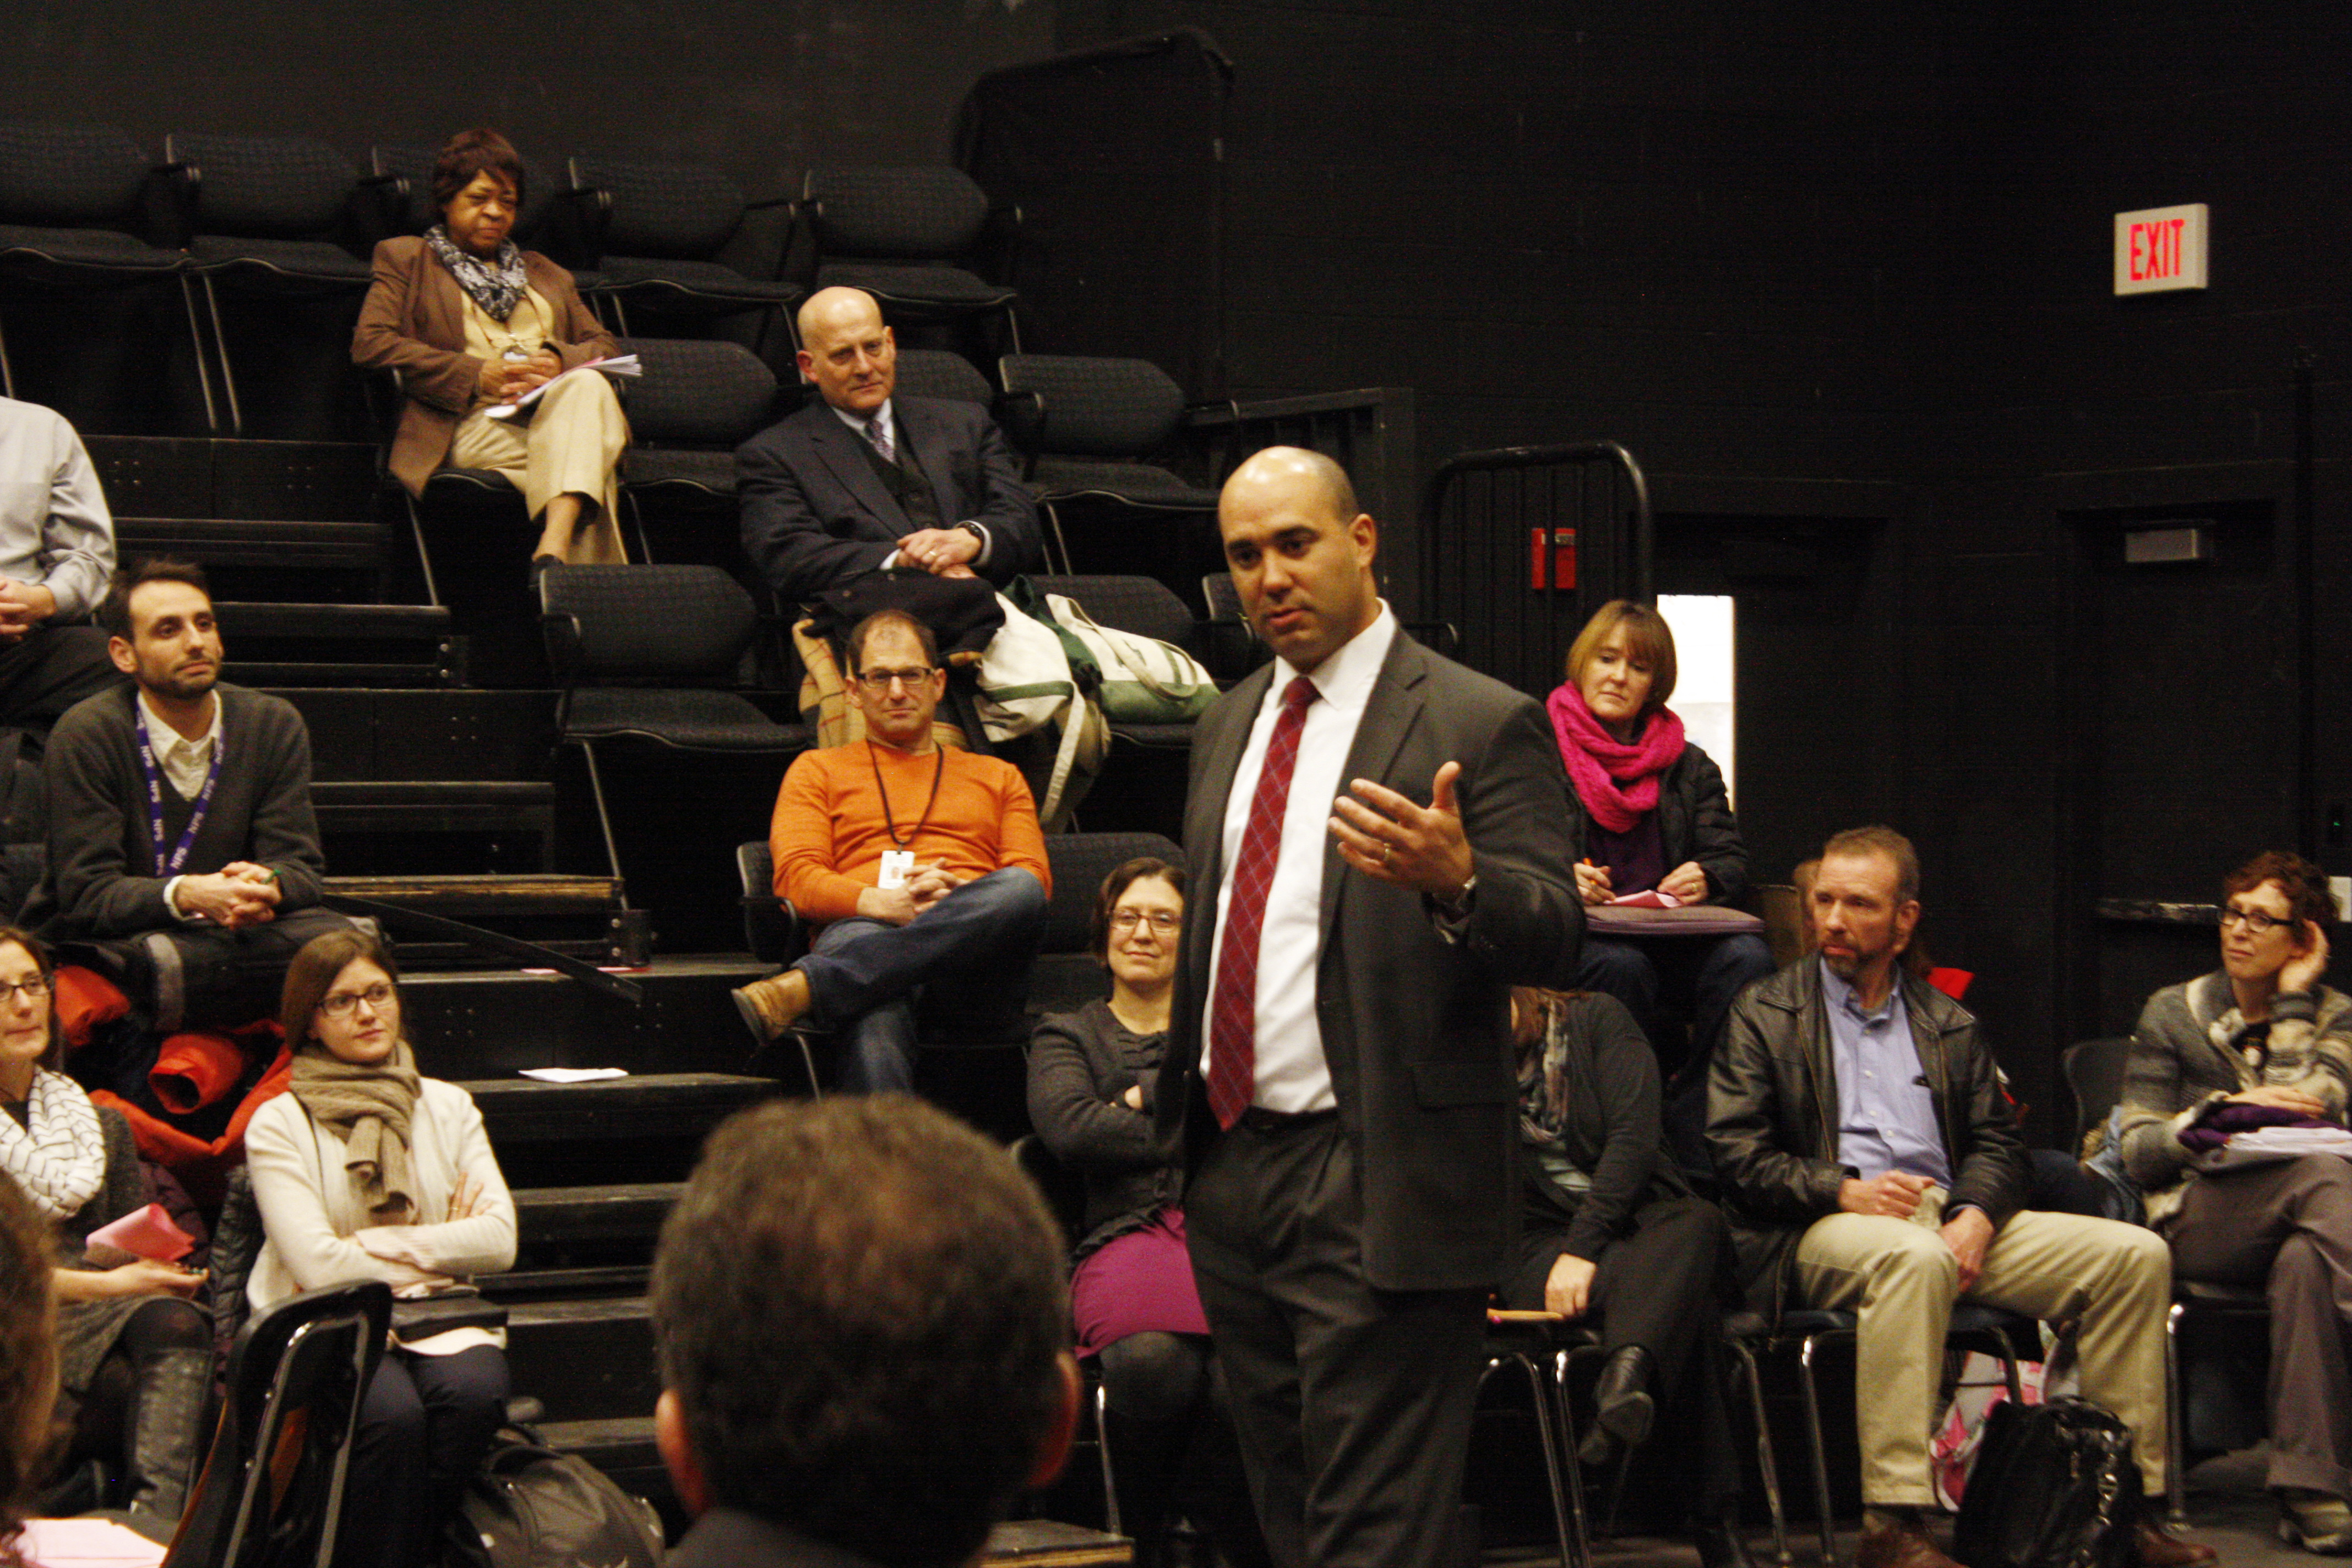 Principal search semi-finalist Henry Turner speaks to staff in the Little Theater during his visit Thursday, Jan. 11.